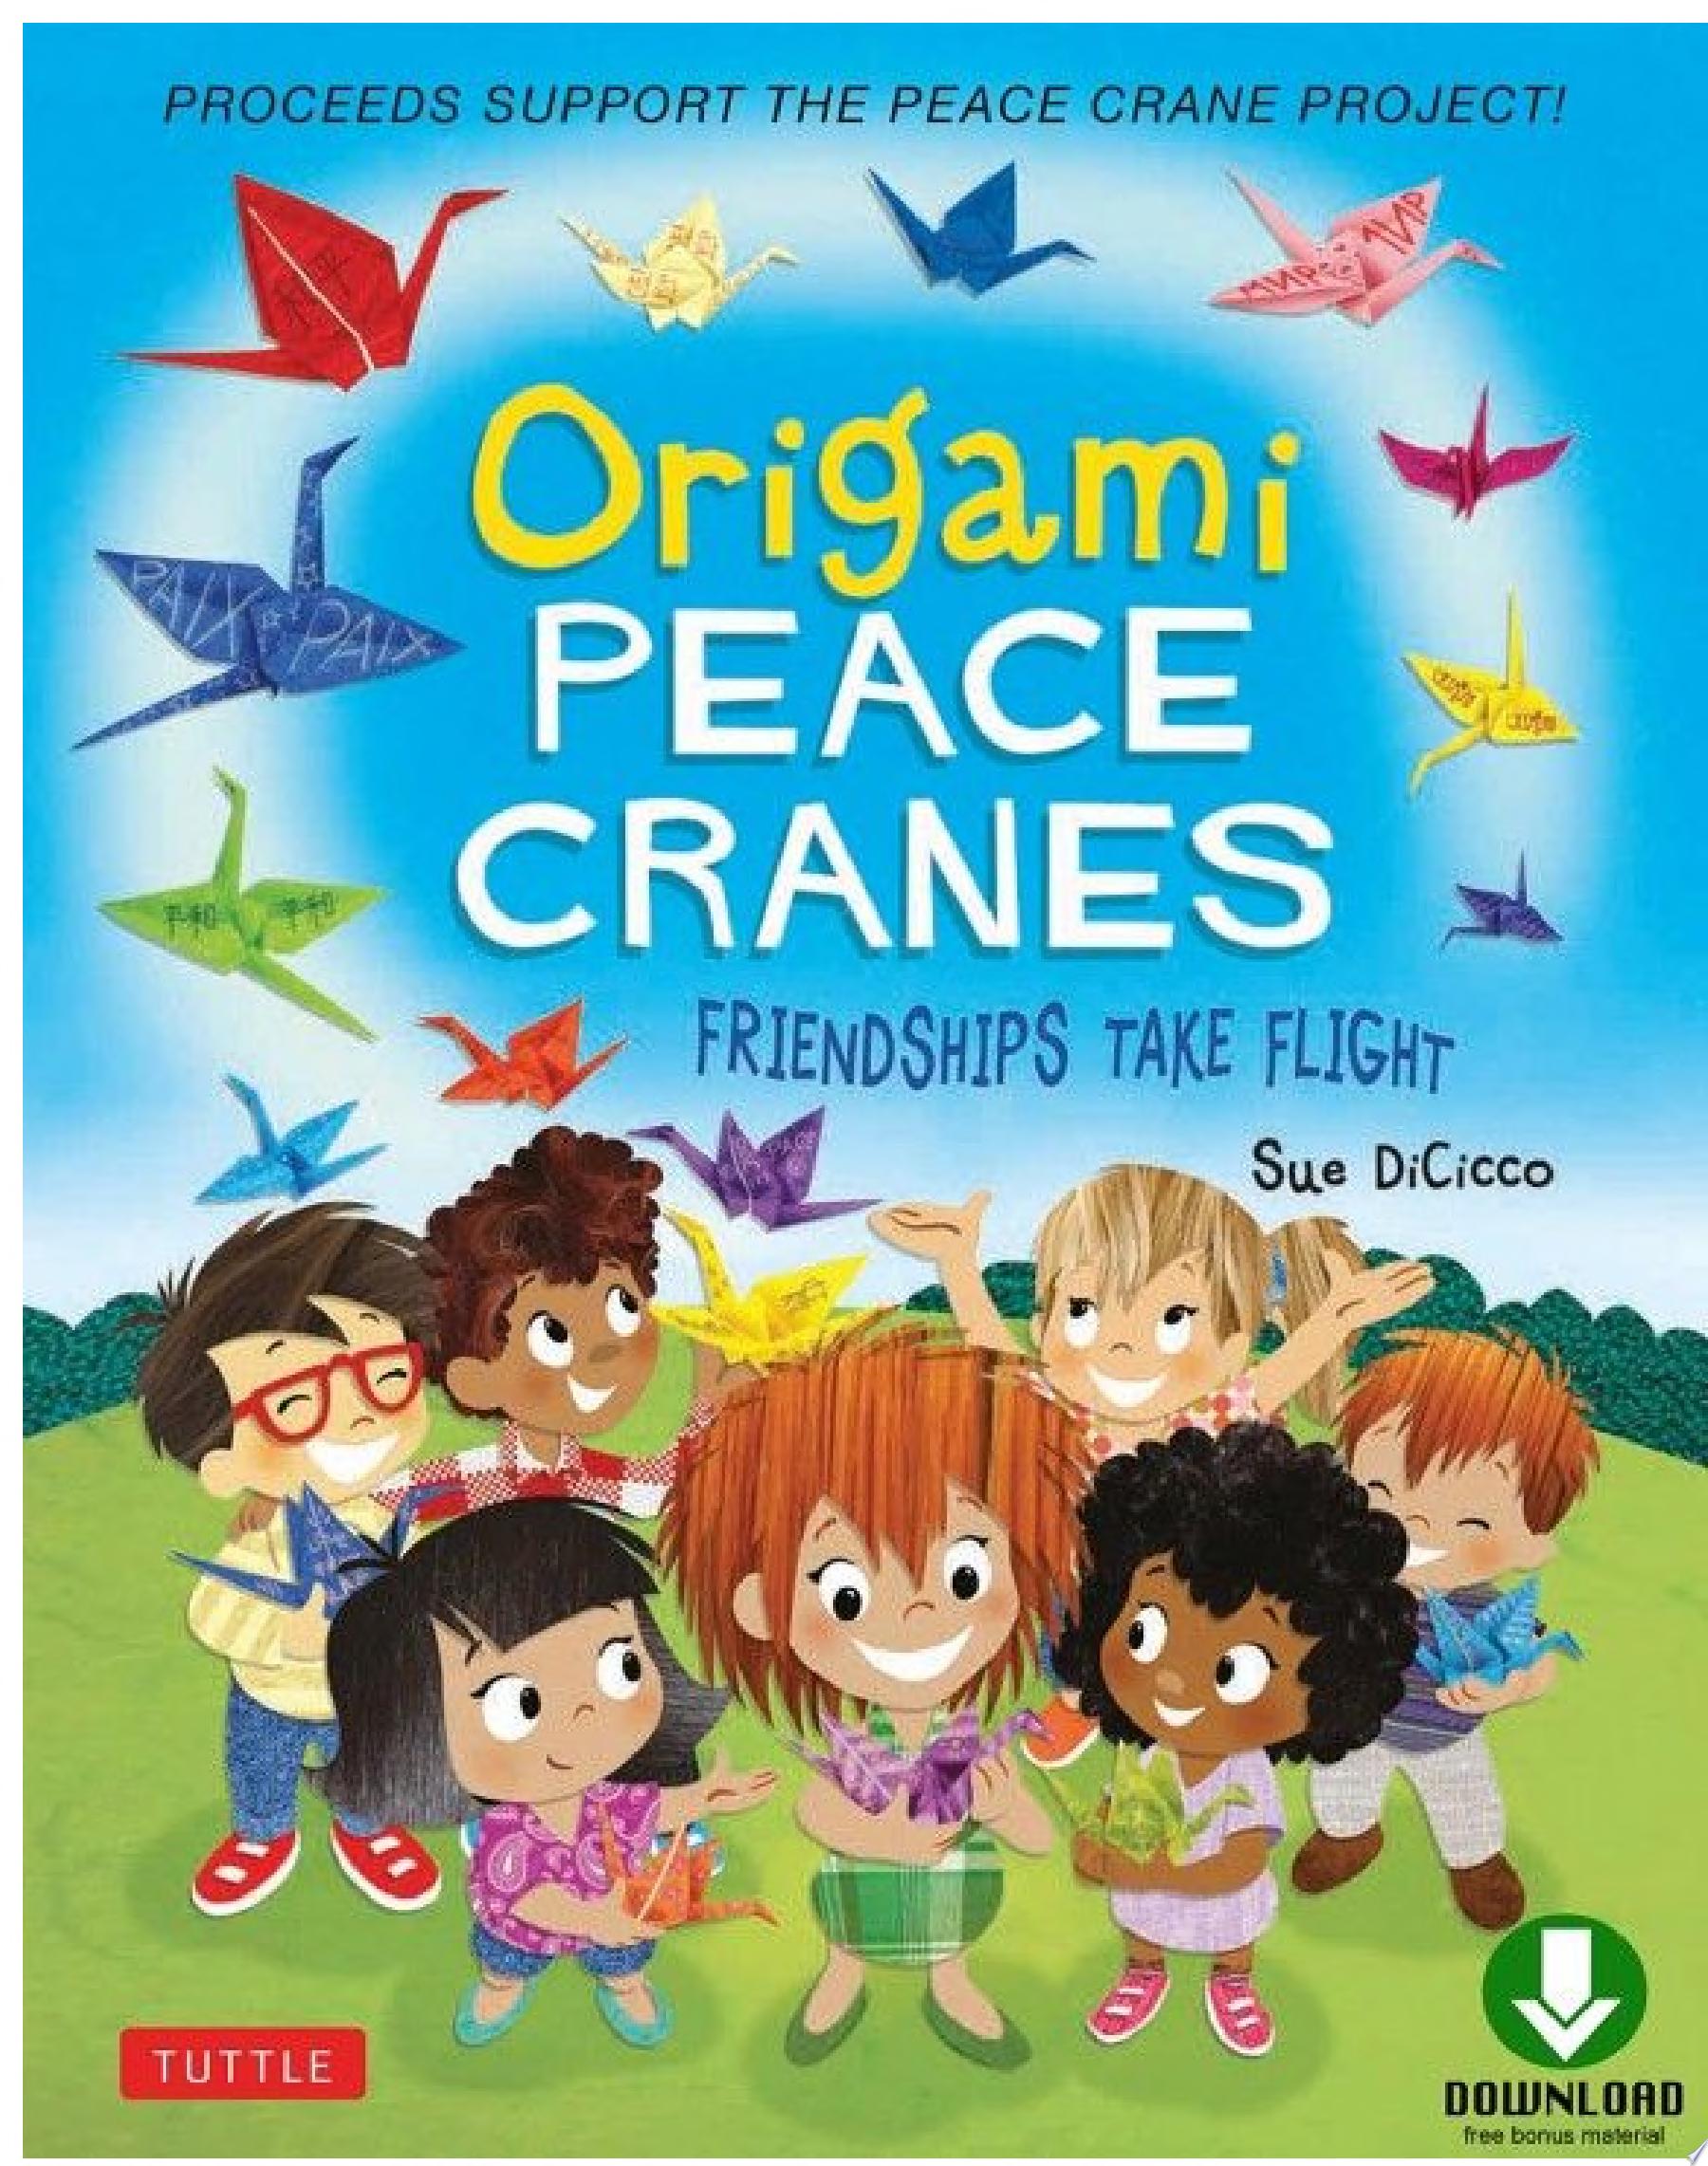 Image for "Origami Peace Cranes"